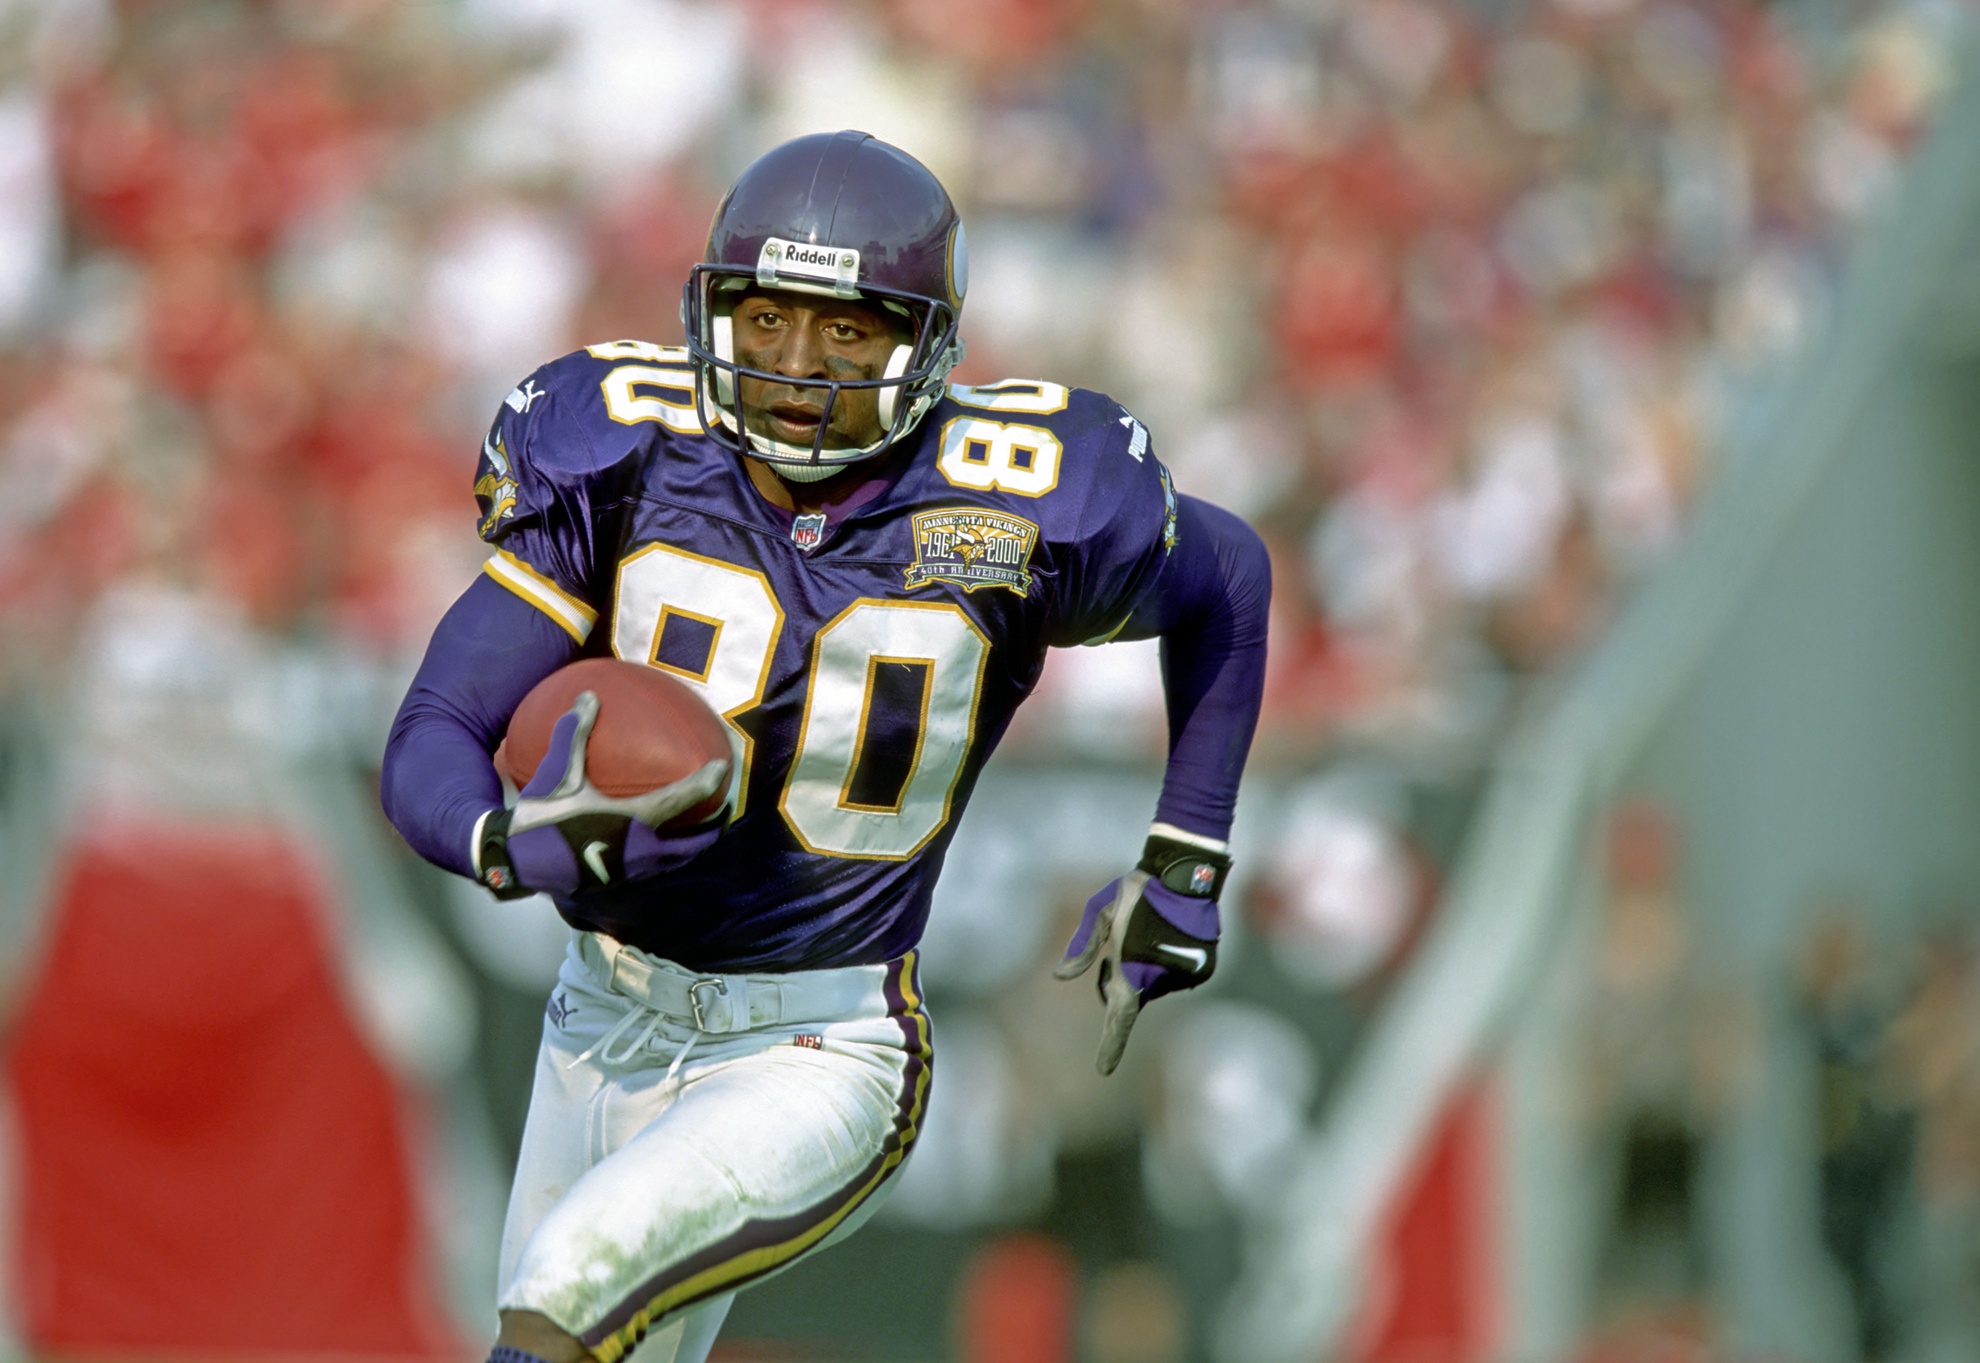 Minnesota Vikings - Cris Carter with a one-handed catch against